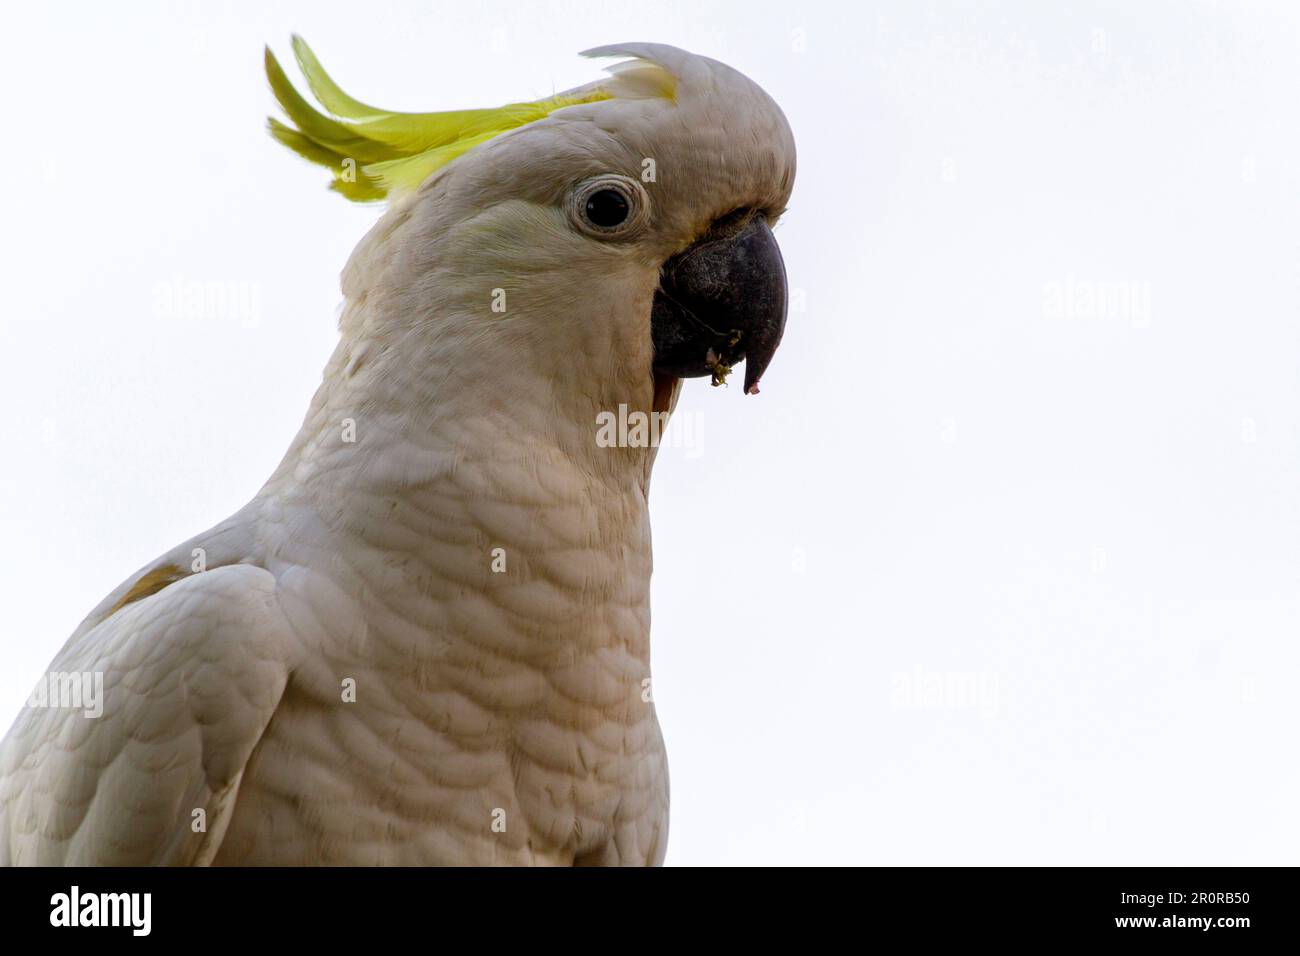 May 8, 2023, Sydney, New South Wales, Australia: Close ''“ up of Sulphur-Crested Cockatoo (Cacatua galerita) in Sydney, New South Wales, Australia. The Sulphur-Crested Cockatoo is a relatively large white cockatoo with a spectacular plumed yellow crest and dark bill. It is found in wooded habitats in Australia, New Guinea, and some of the islands of Indonesia. Sulphur Crested Cockatoos have multiple subspecies like Lesser, Medium, and Greater Sulphur Crested Cockatoo; all belong to the same Genus (Cacatua) and Phylum. Since all subspecies of Sulphur Crested cockatoos look very similar, they ar Stock Photo